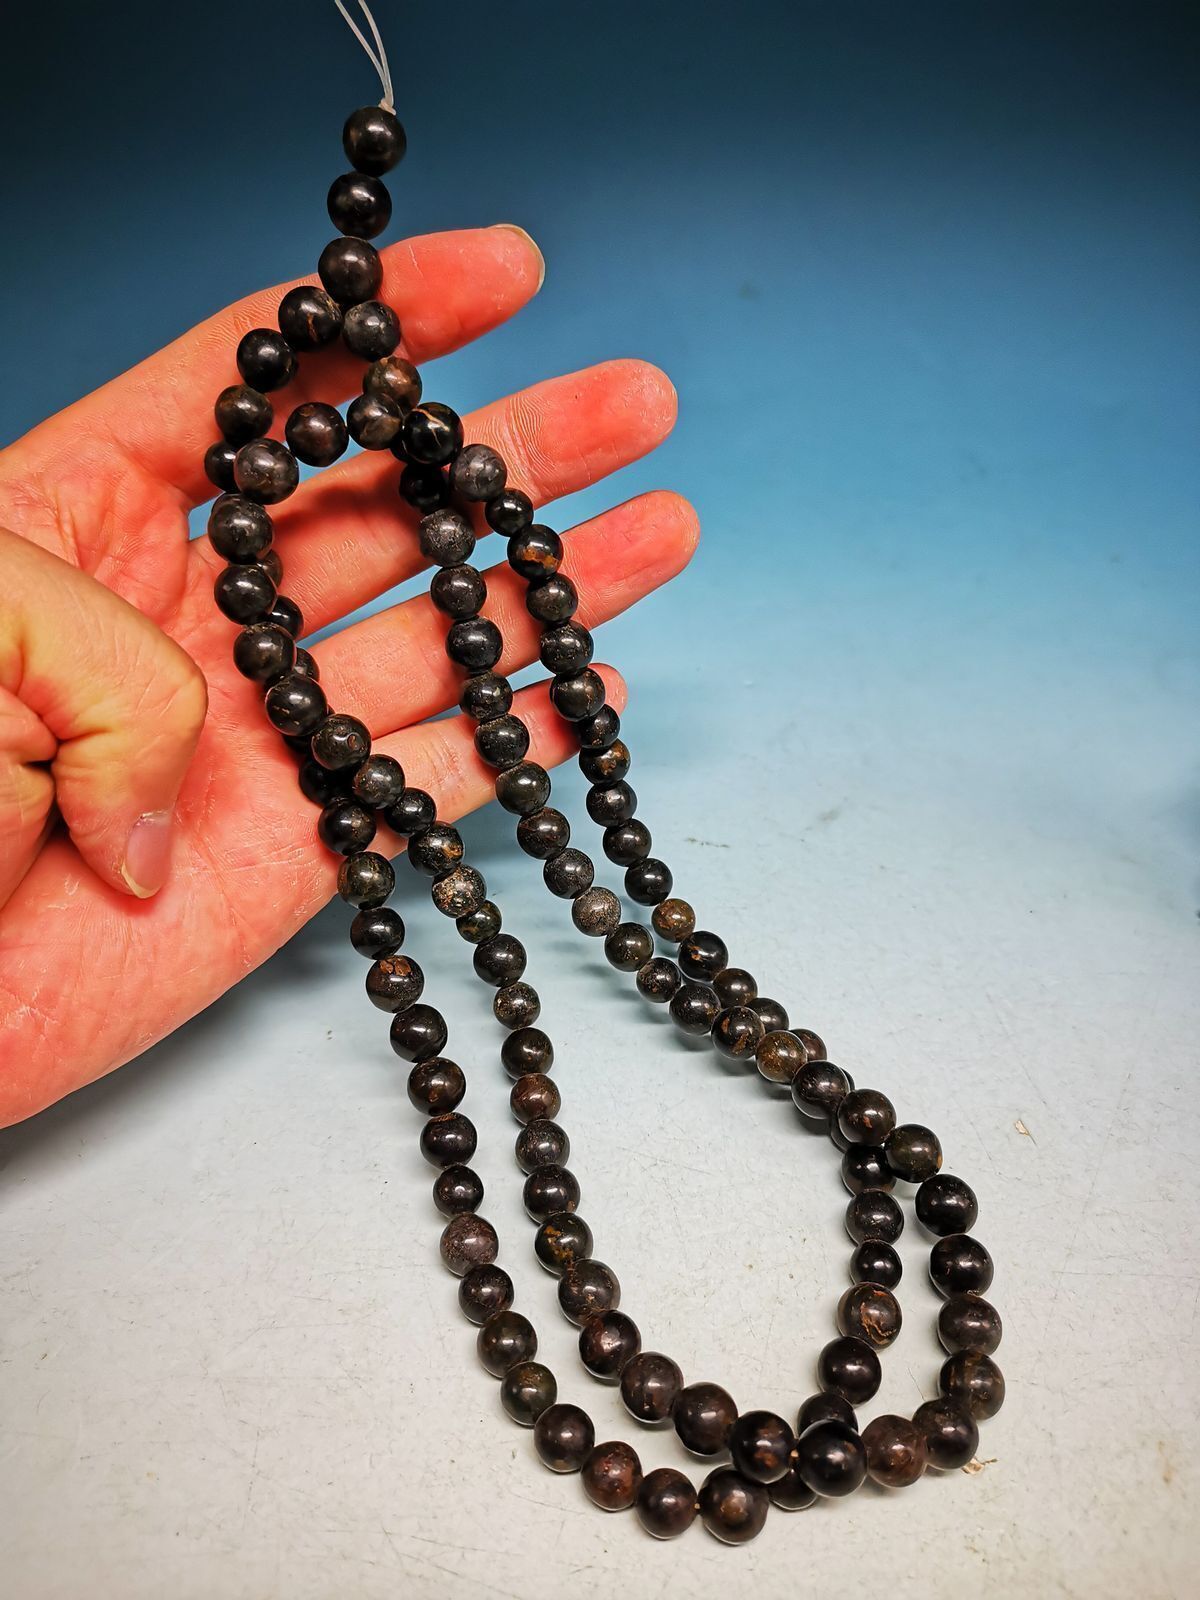 50cm Perfect Rare Oriental Old Black Jade Hand Polished Bead Necklace M01